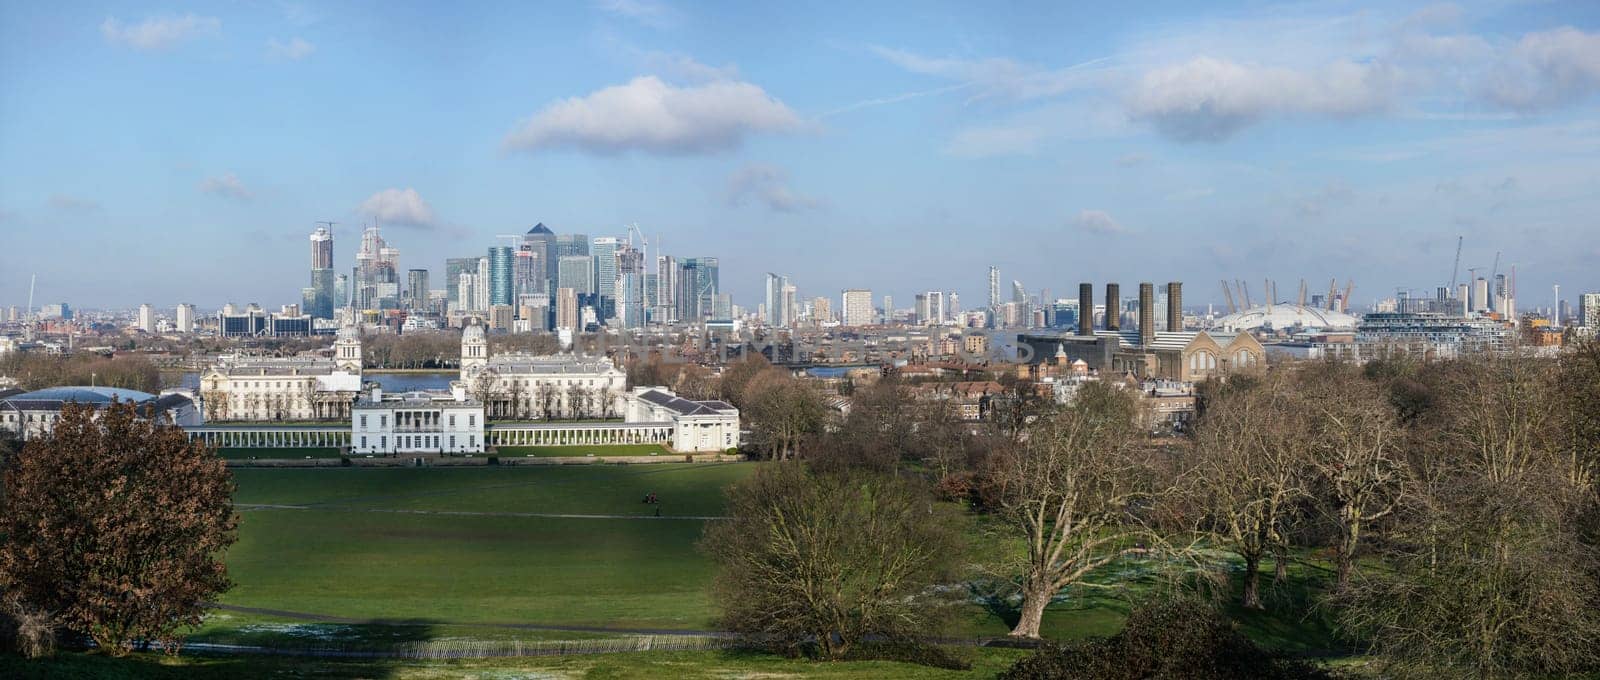 London, United Kingdom - February 02, 2019: Panorama of Canary Wharf skyscrapers, National Maritime museum in front, O2 arena on right side, as seen from Greenwich, during sunny day by Ivanko